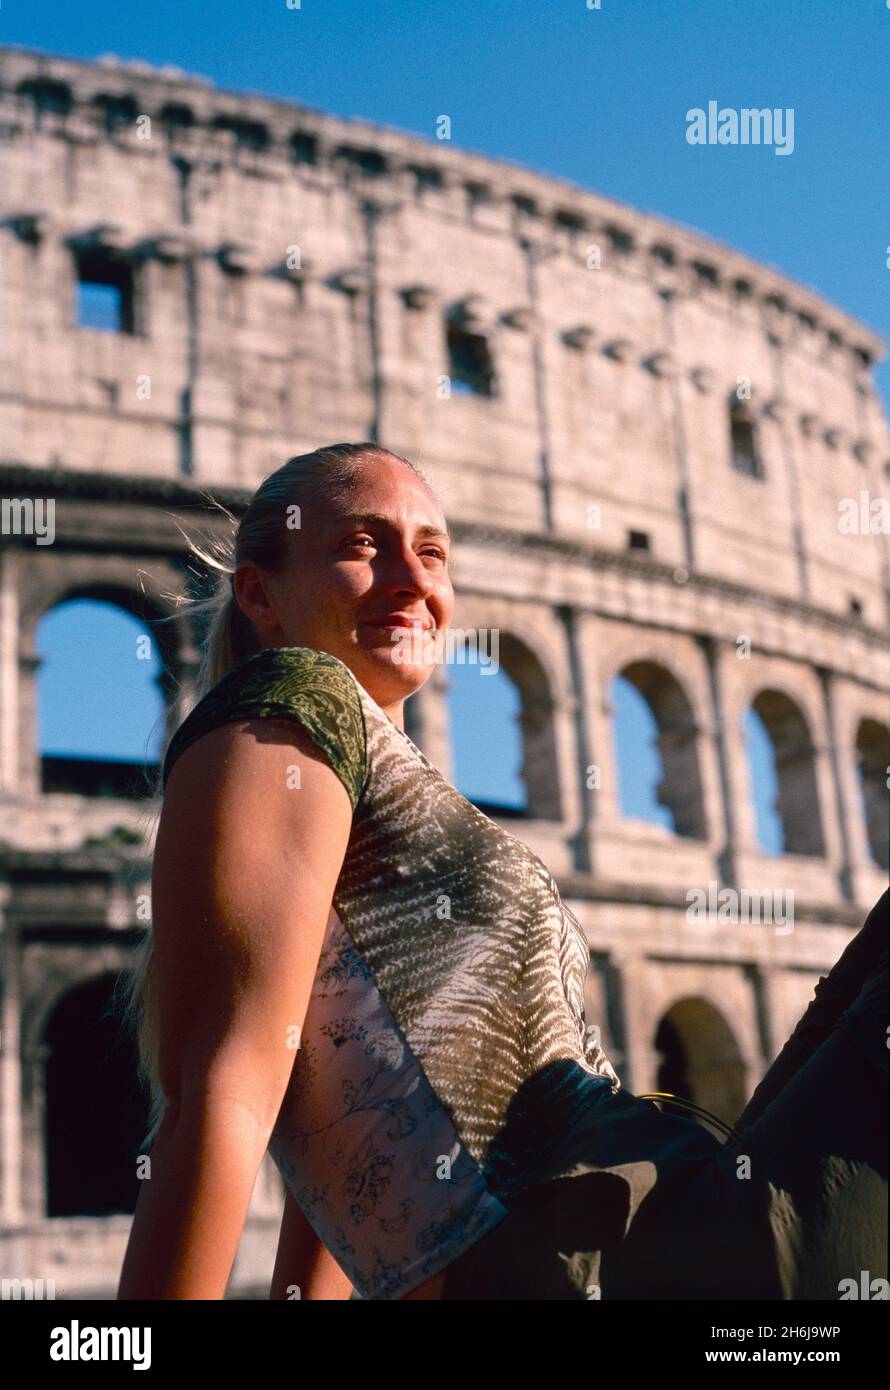 Canadian-American-French tennis player Mary Pierce at the Italian Open, Rome, 2000 Stock Photo